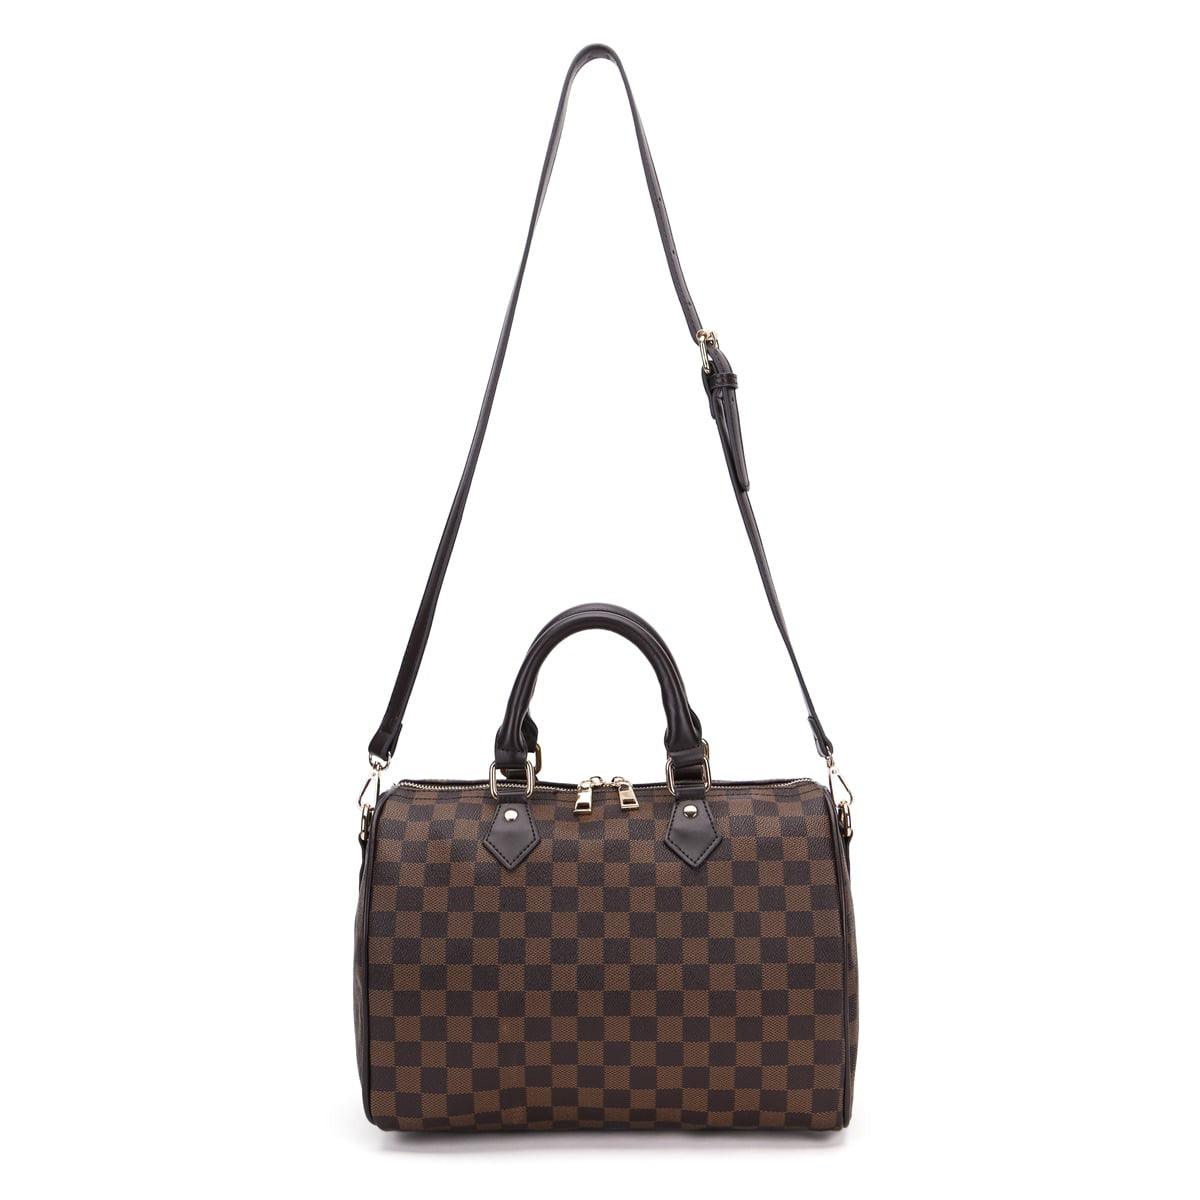 FR Fashion Co. 11" Women's Checkered Tote Shoulder Bag with Inner Pouch - FR Fashion Co. 